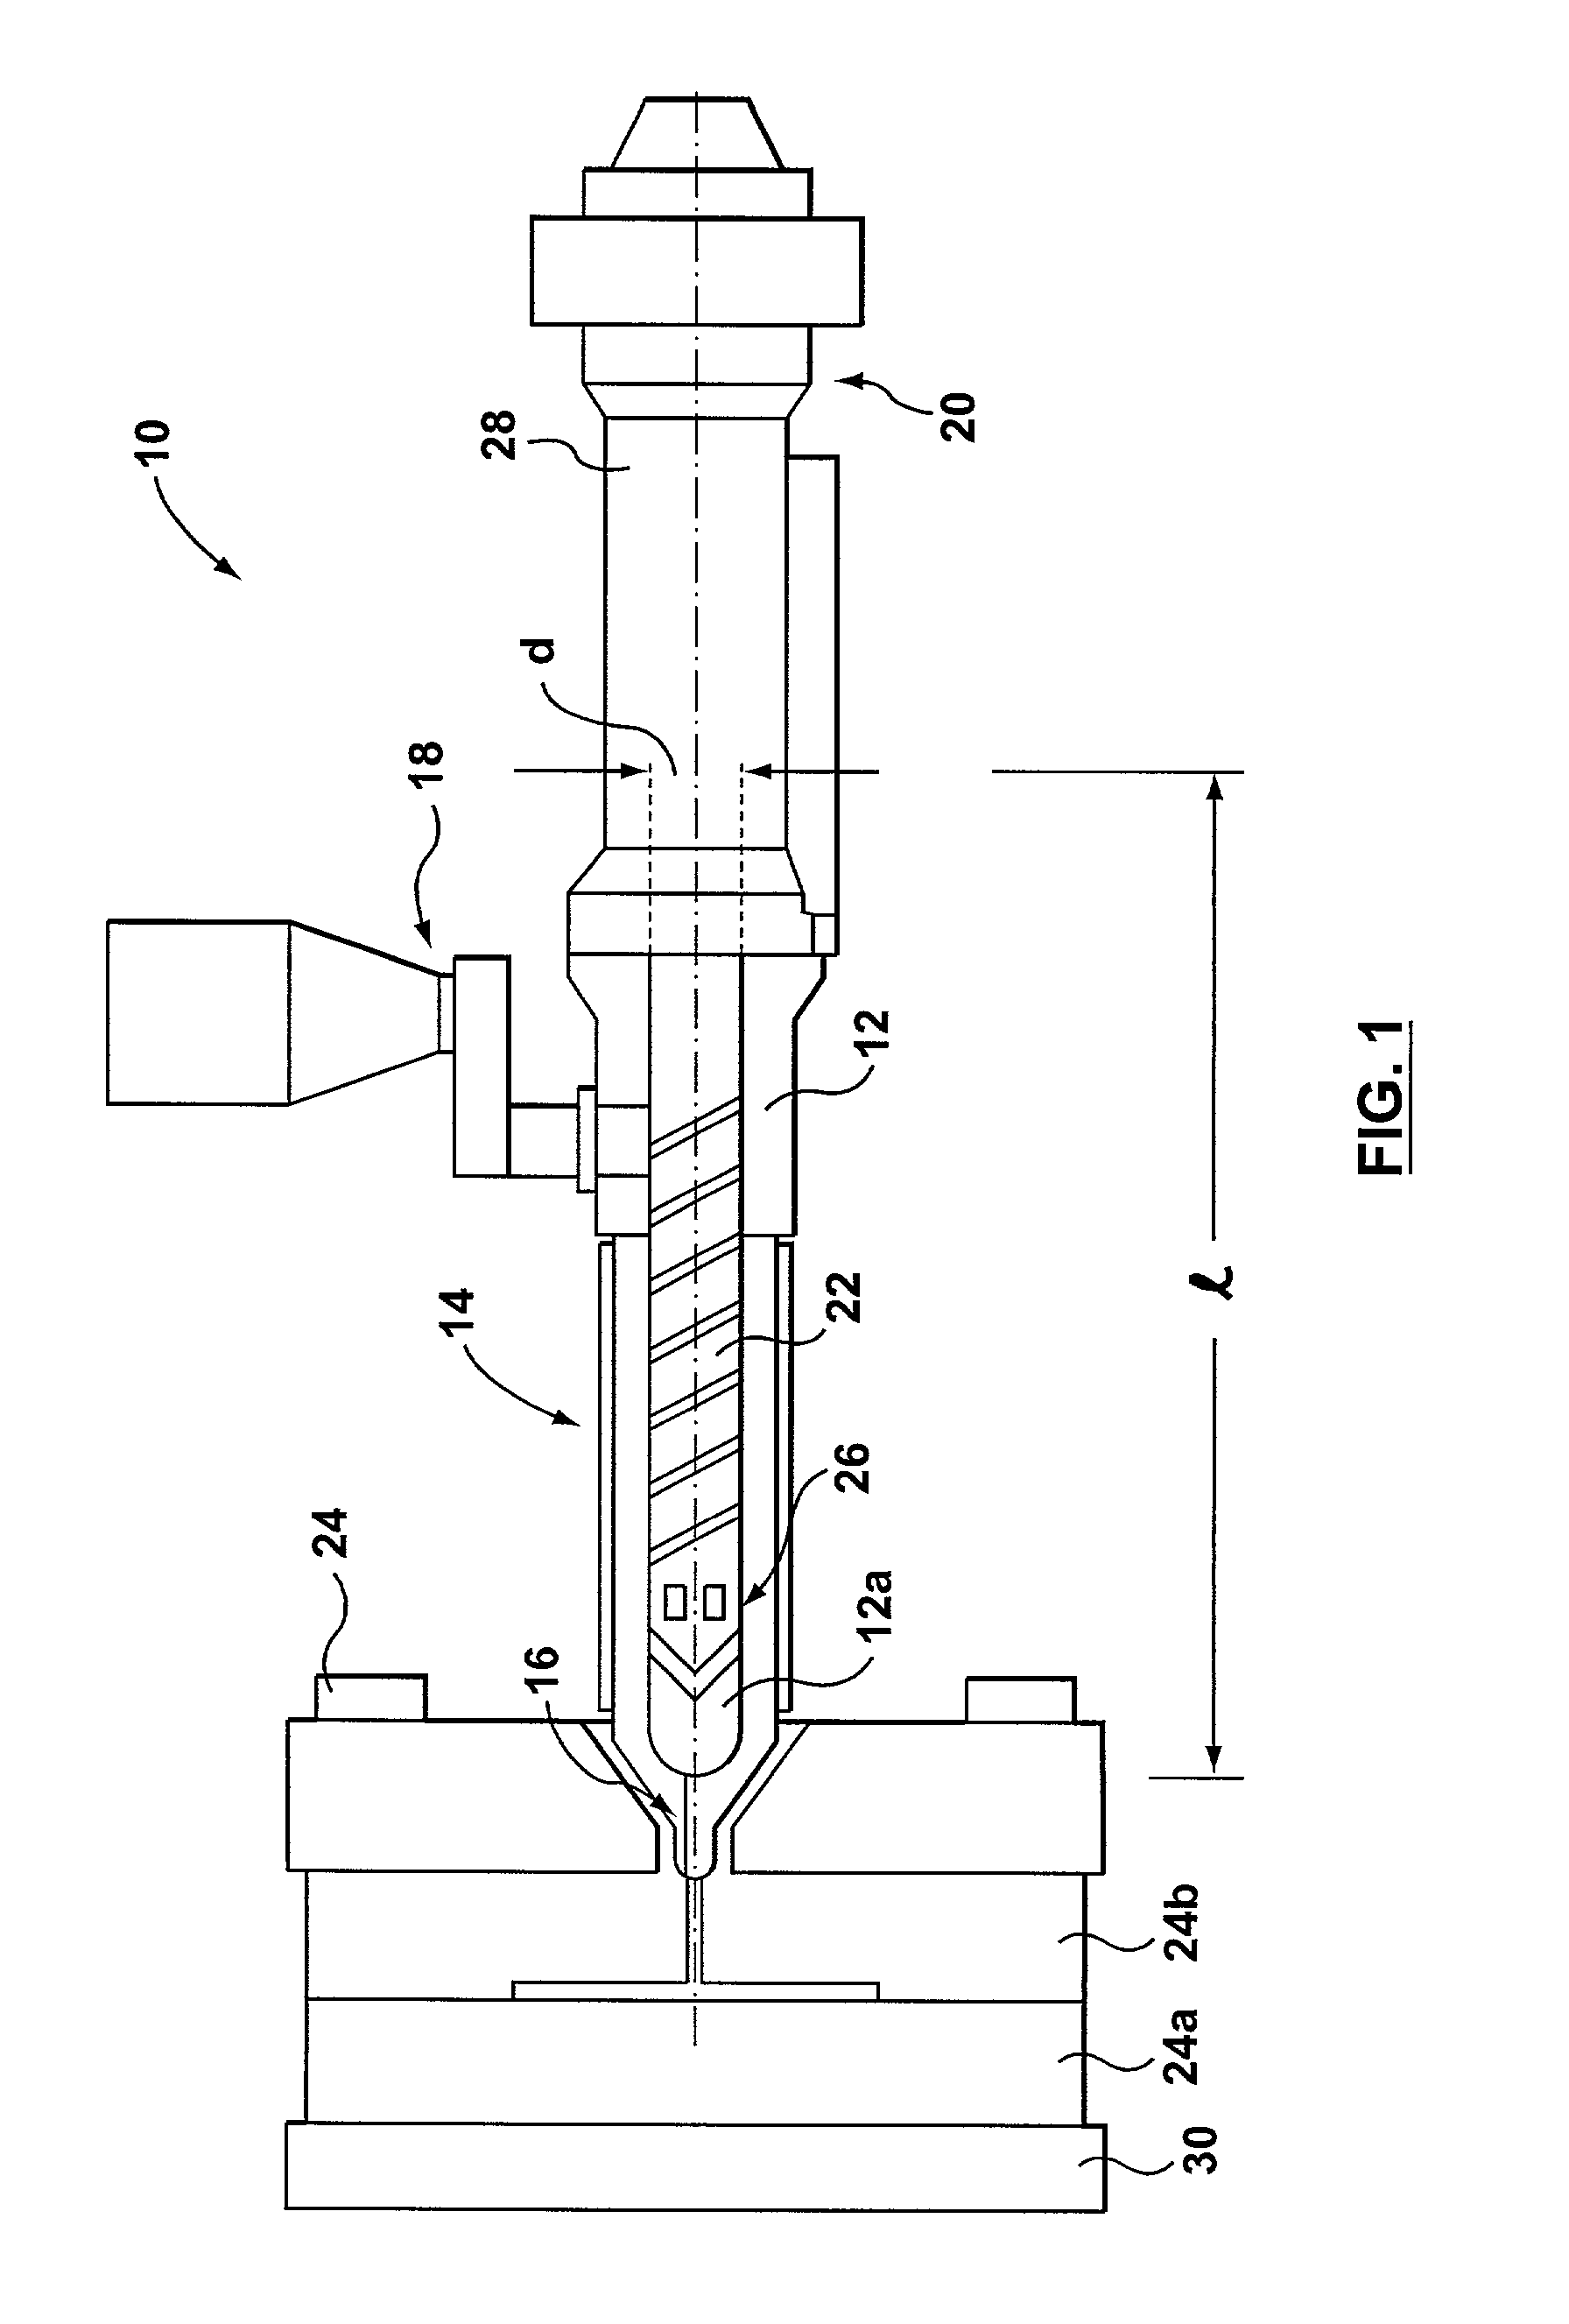 Process for injection molding semi-solid alloys